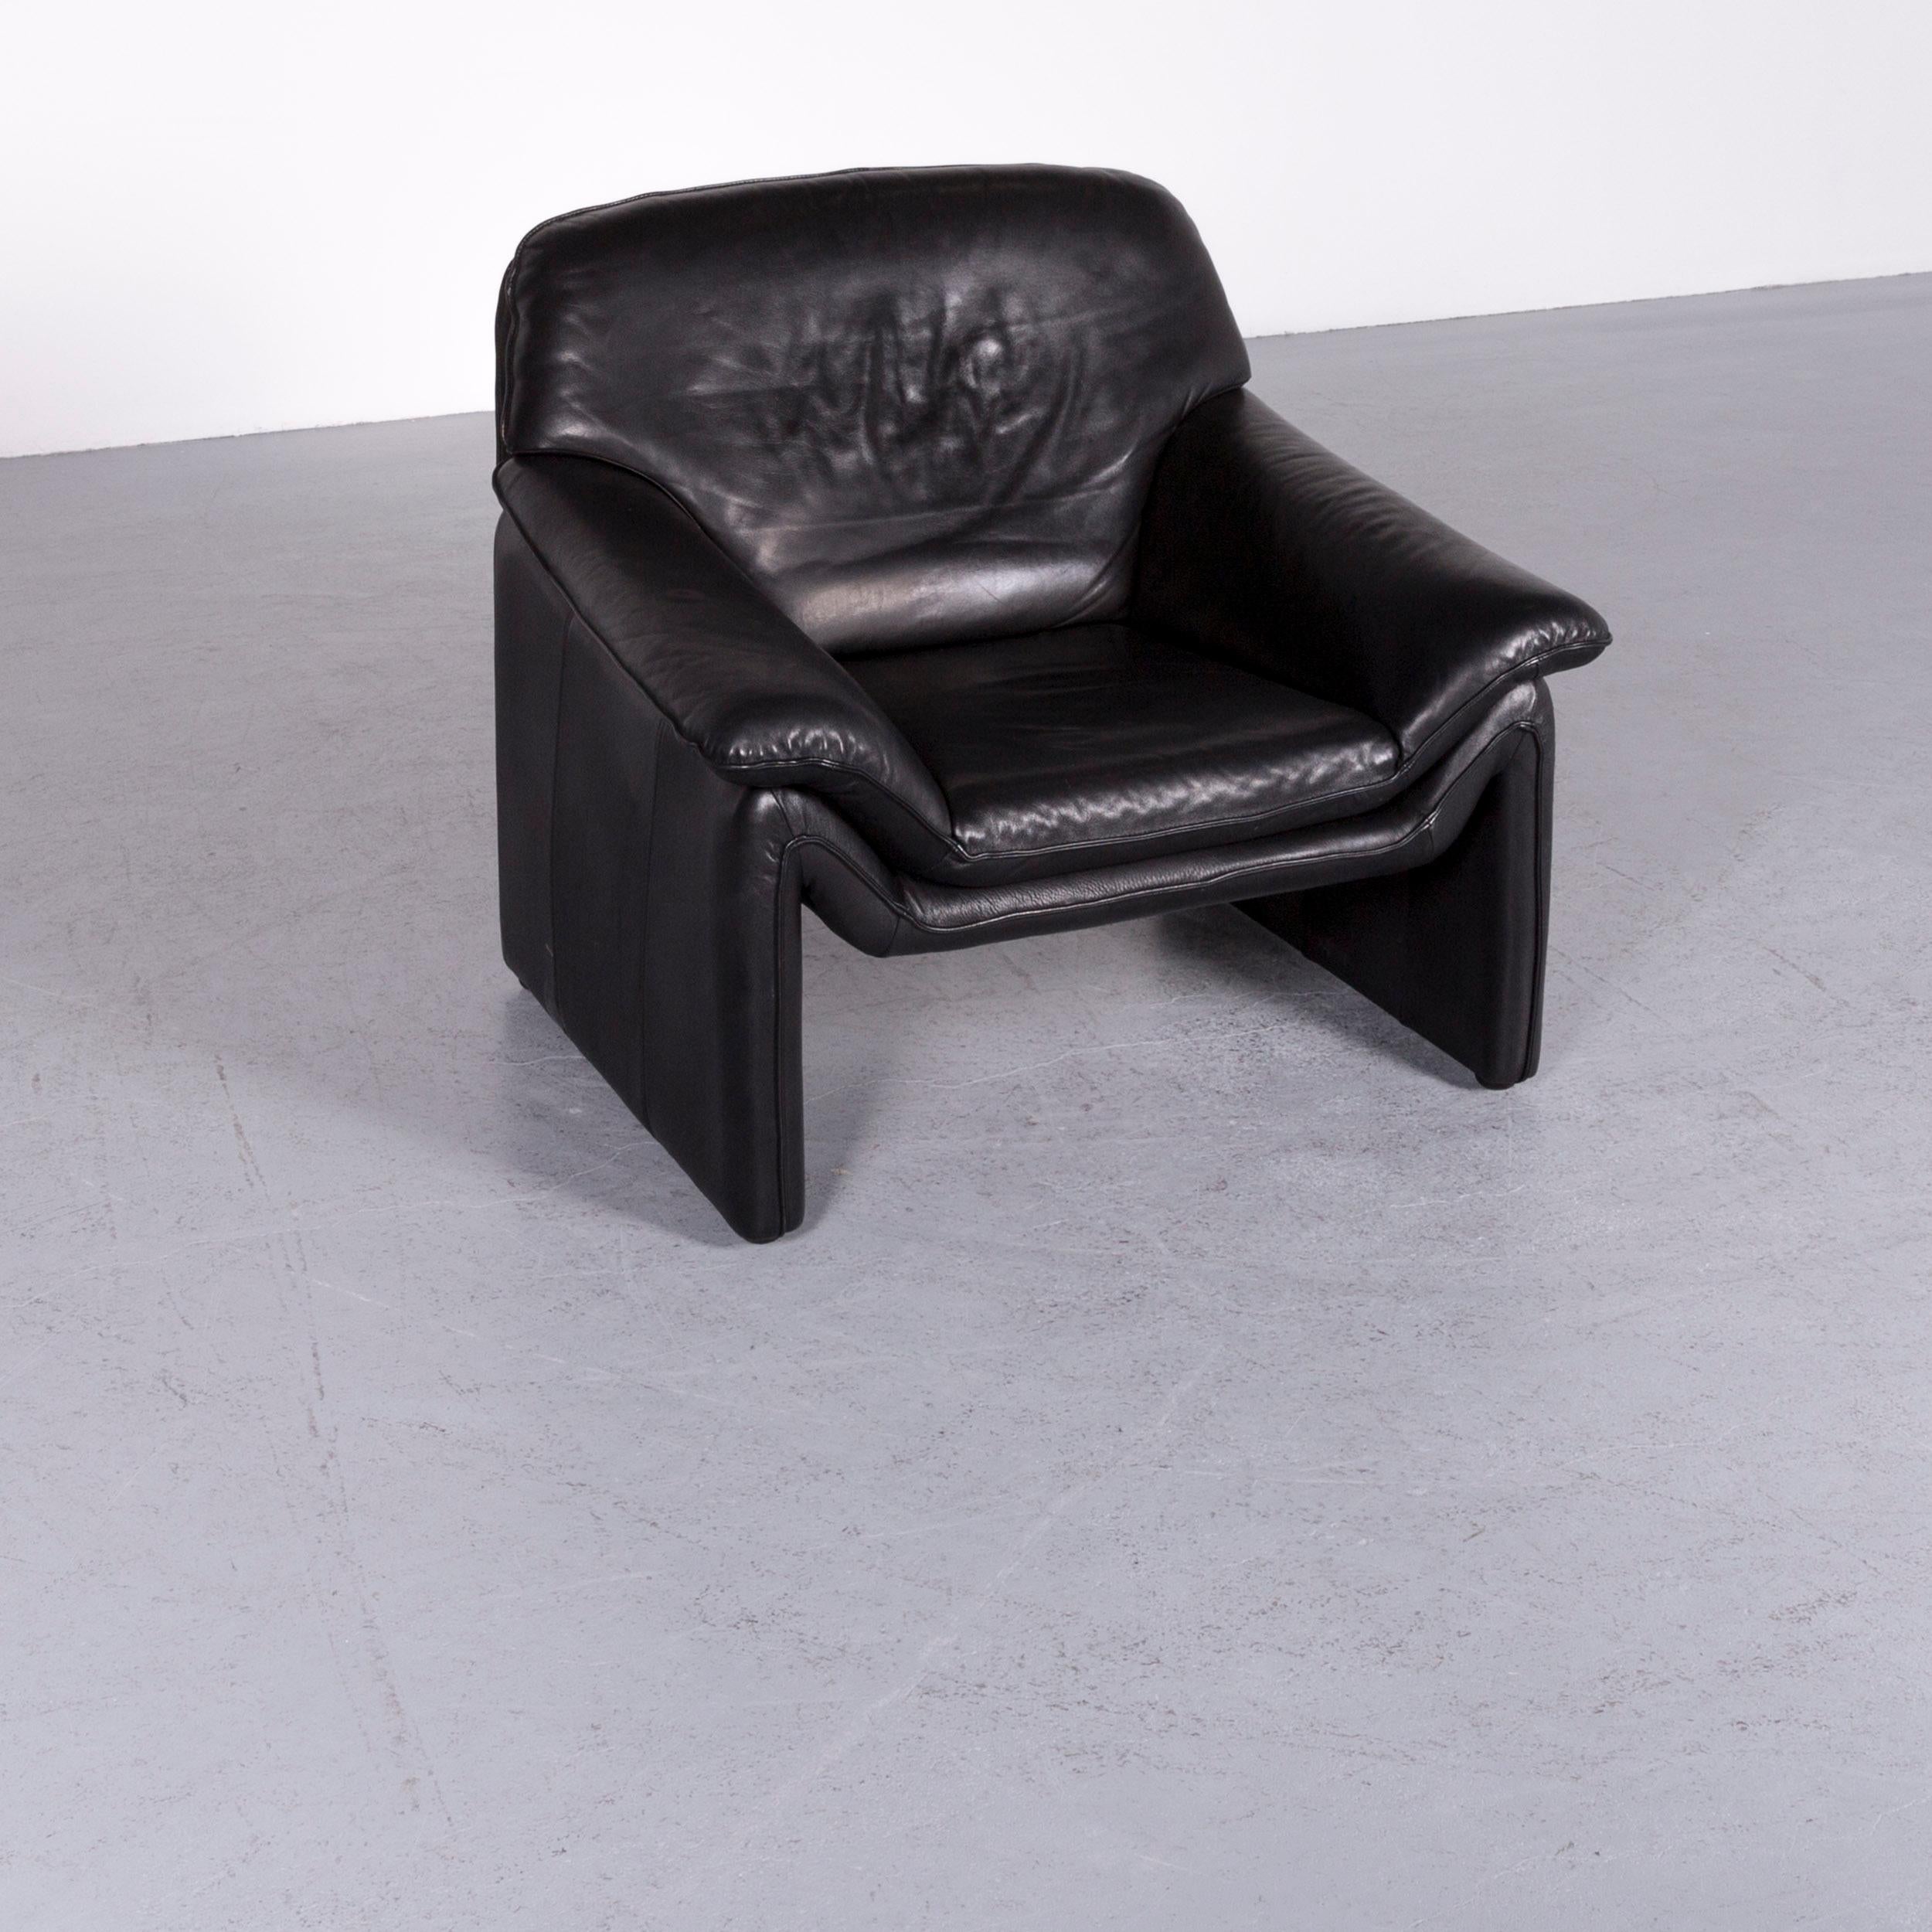 Black colored original Laauser Atlanta designer armchair leather one-seat couch modern.